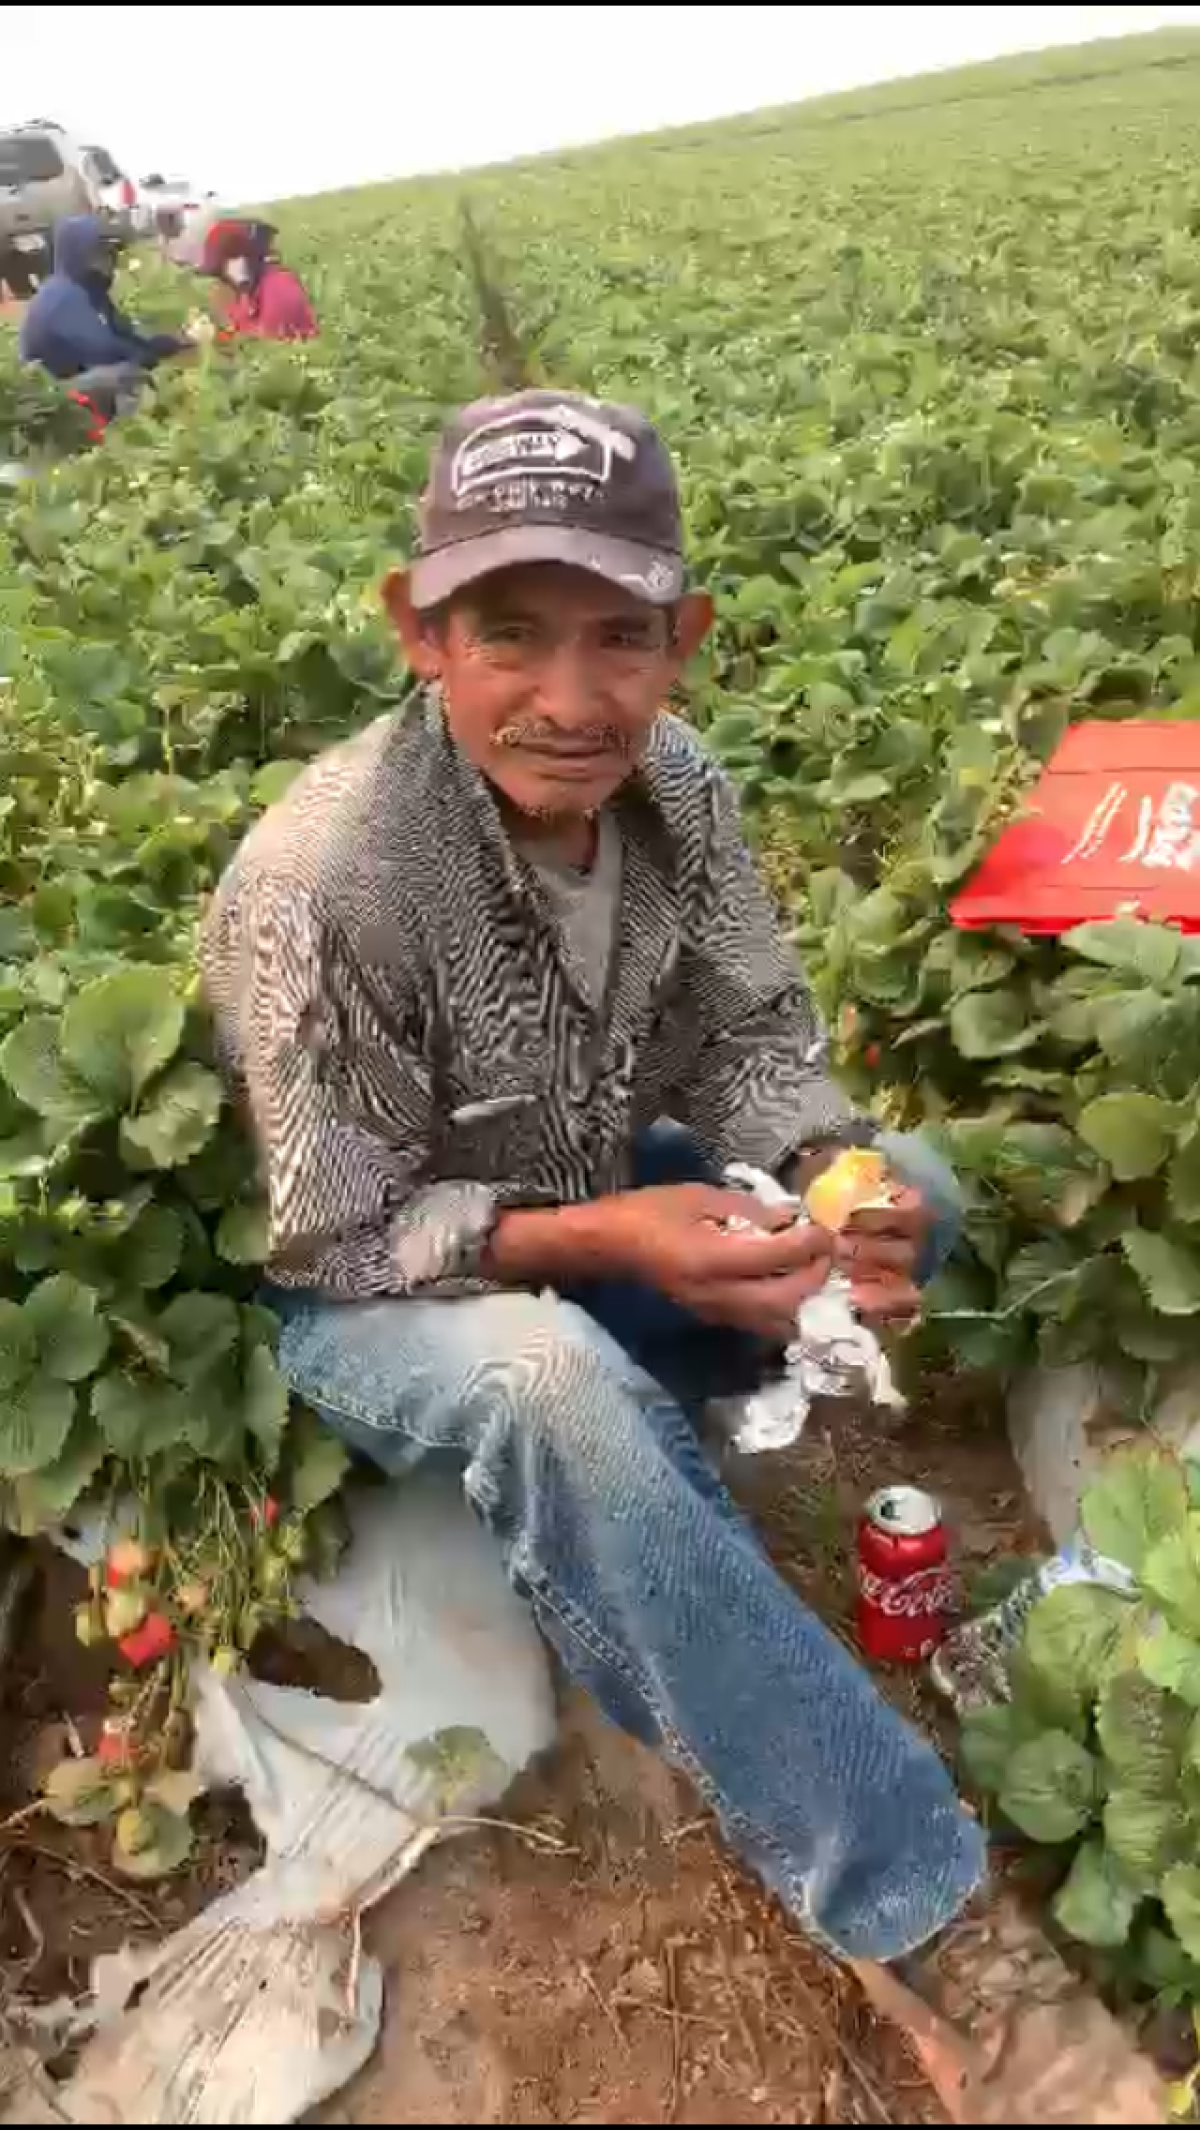 A farmworker eats during a break at camp.